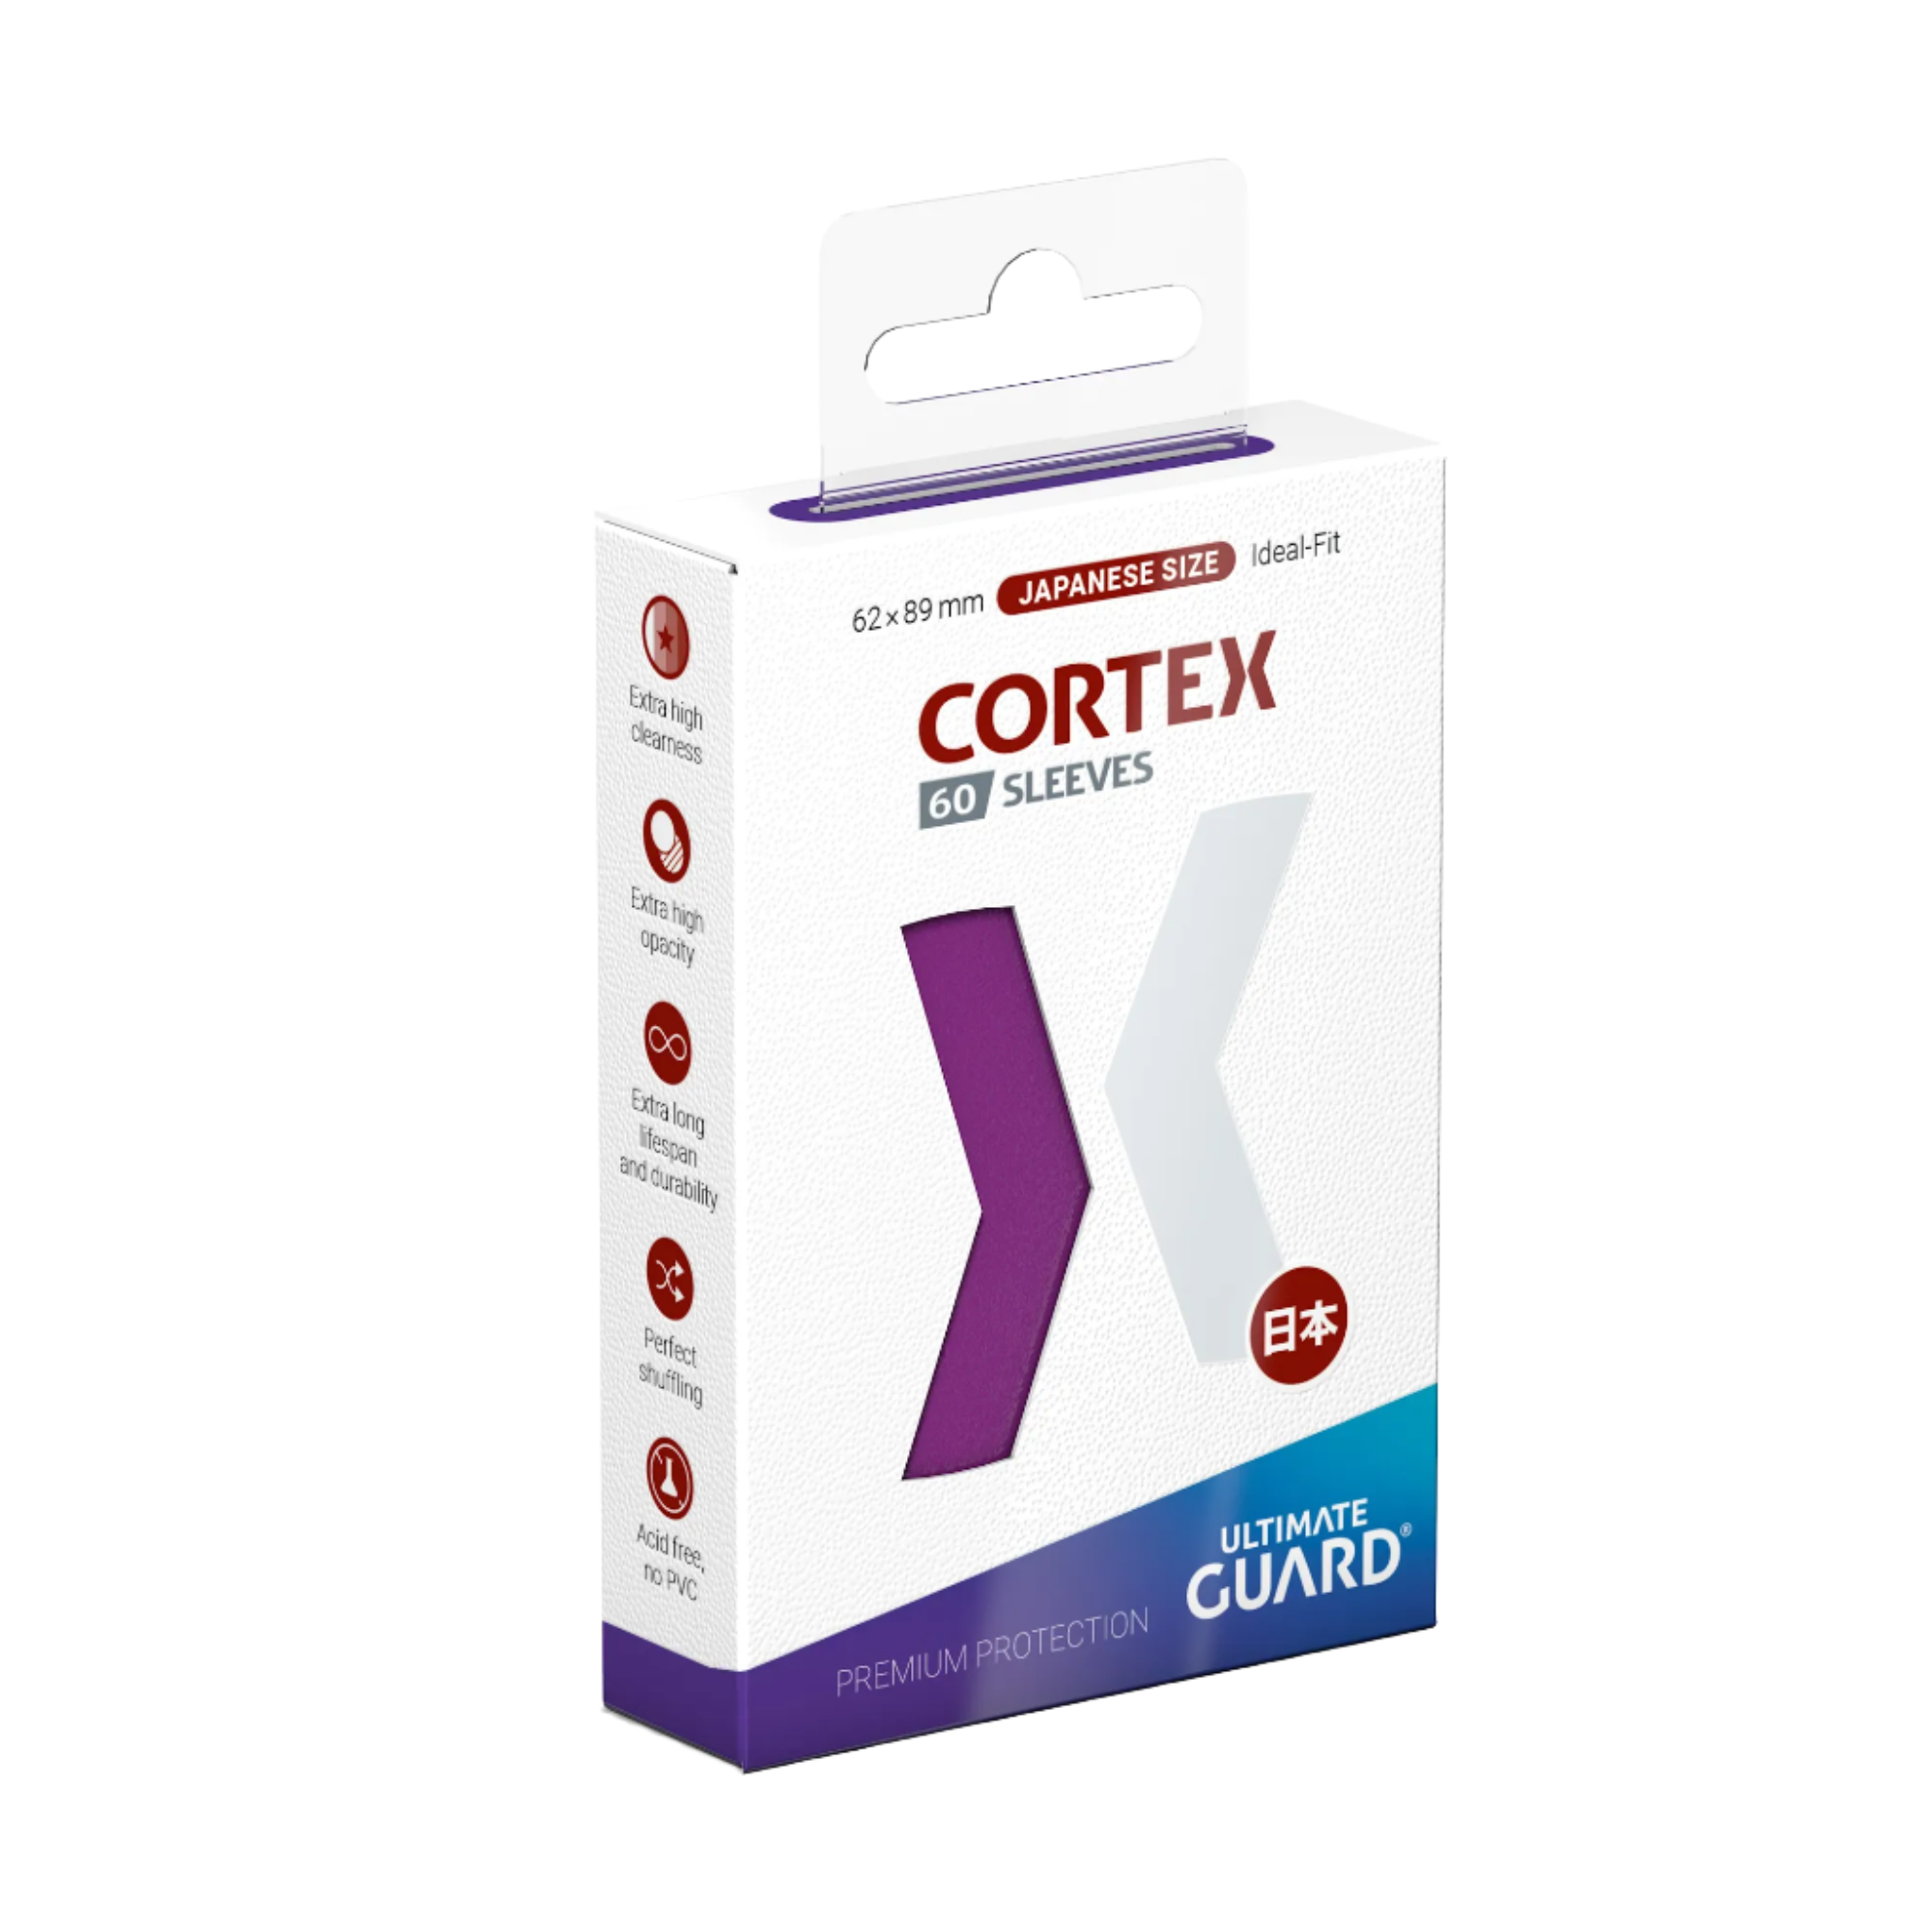 Ultimate Guard - Cortex Sleeves - Japanese Size - Ideal-Fit - Purple - 60pk